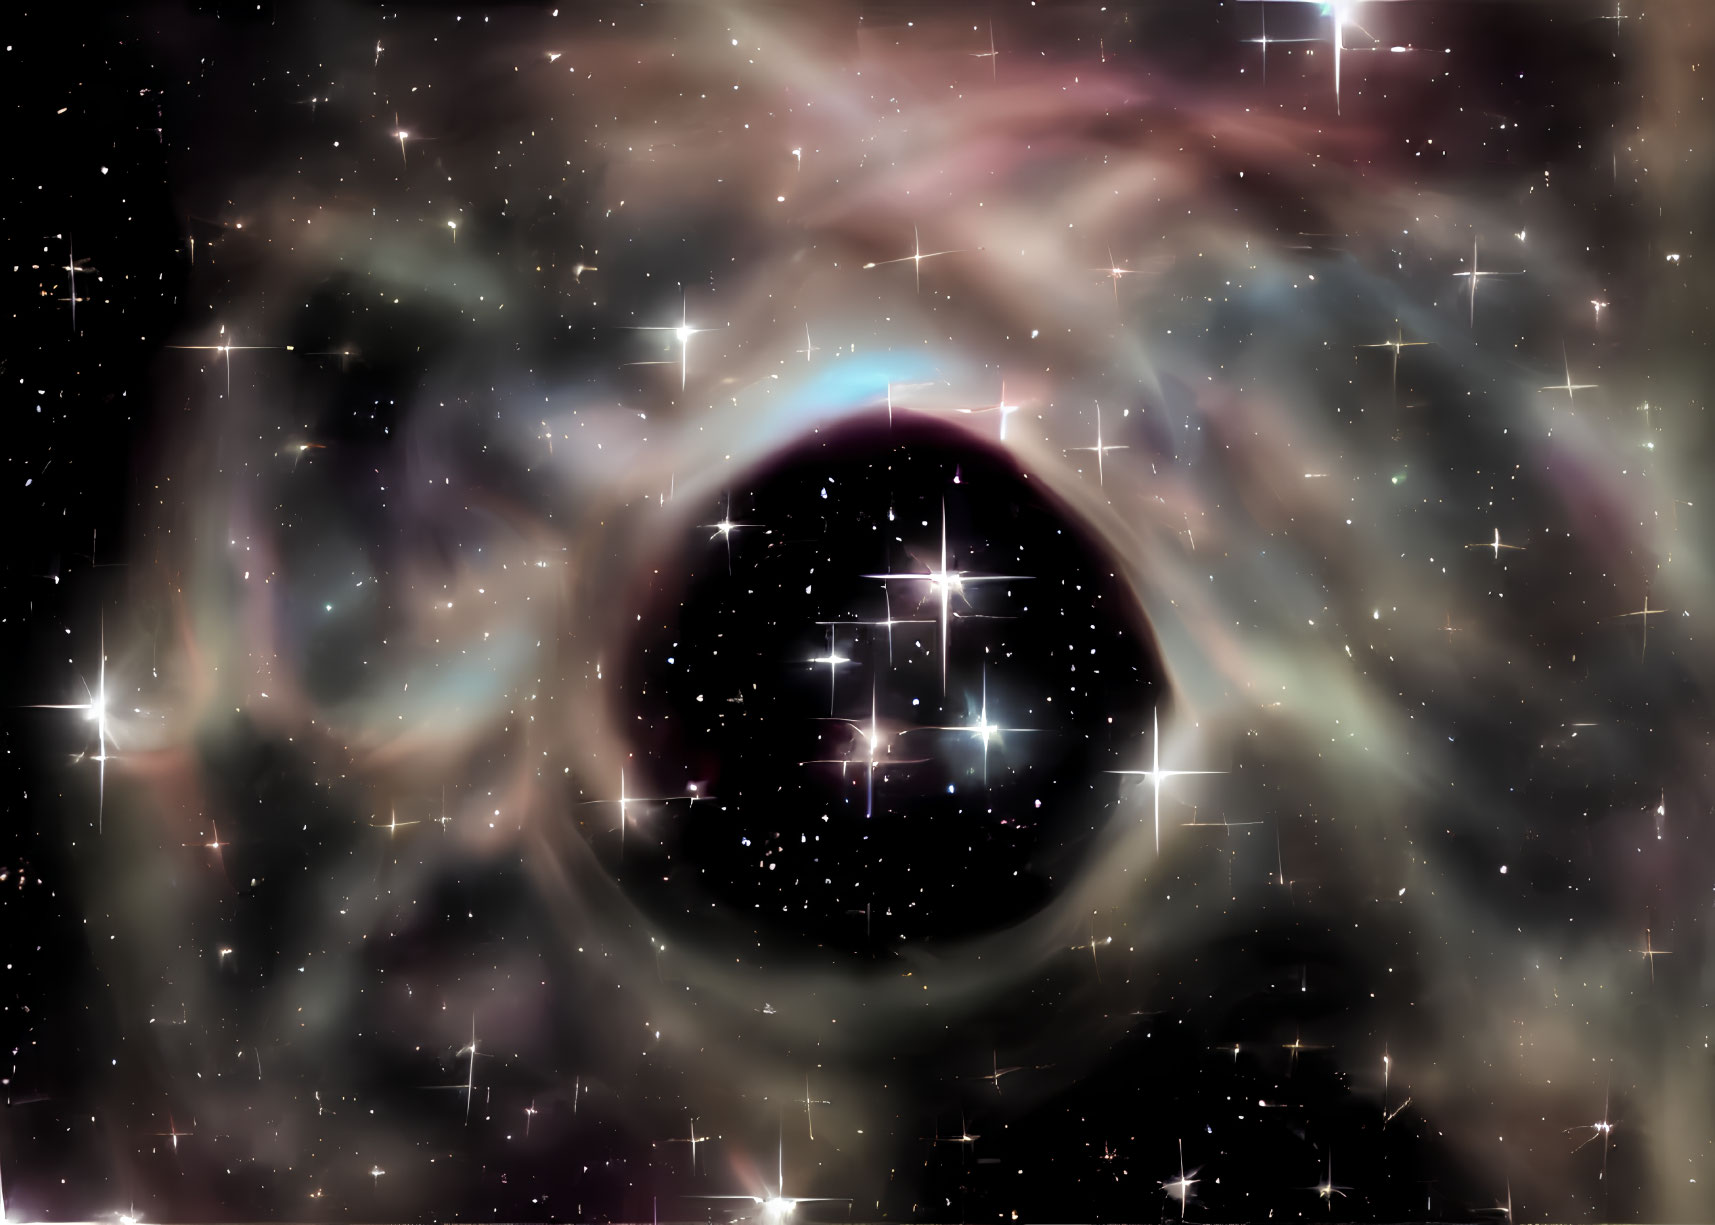 Digital Art: Black Hole with Accretion Disk and Stars